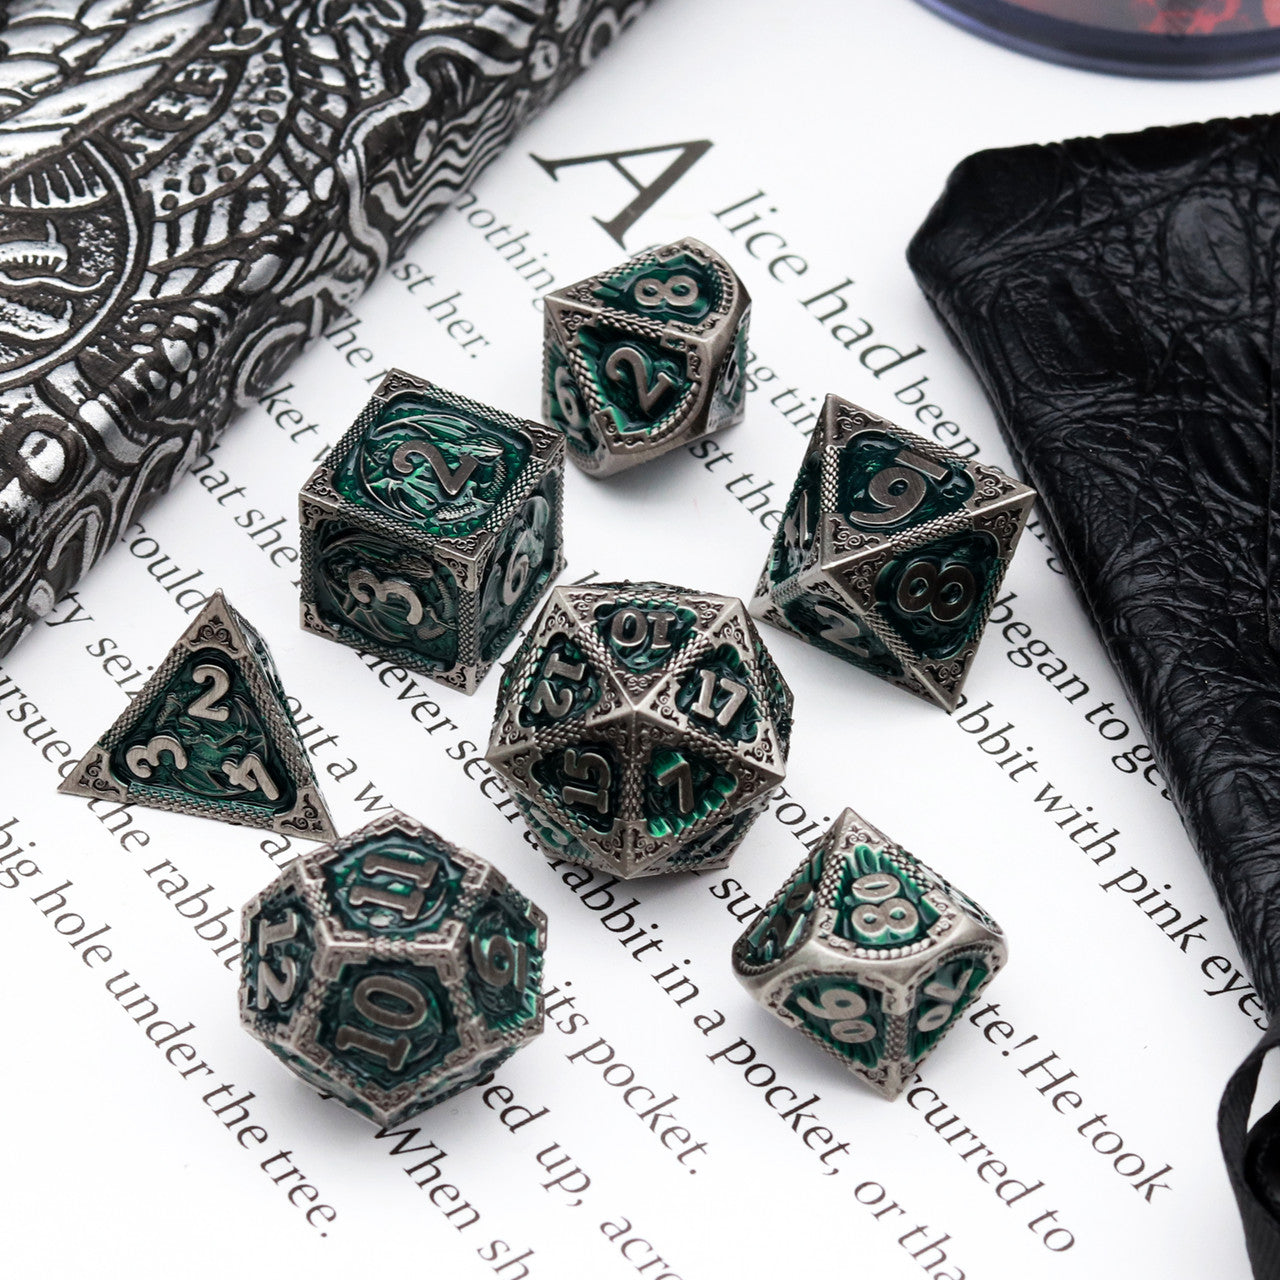 Haxtec Fire-breathing Dragon Pattern Green Metal DND Dice Set With Leather Dice Bag for Dungoens and Dragons RPG Gifts-Antique Iron Green